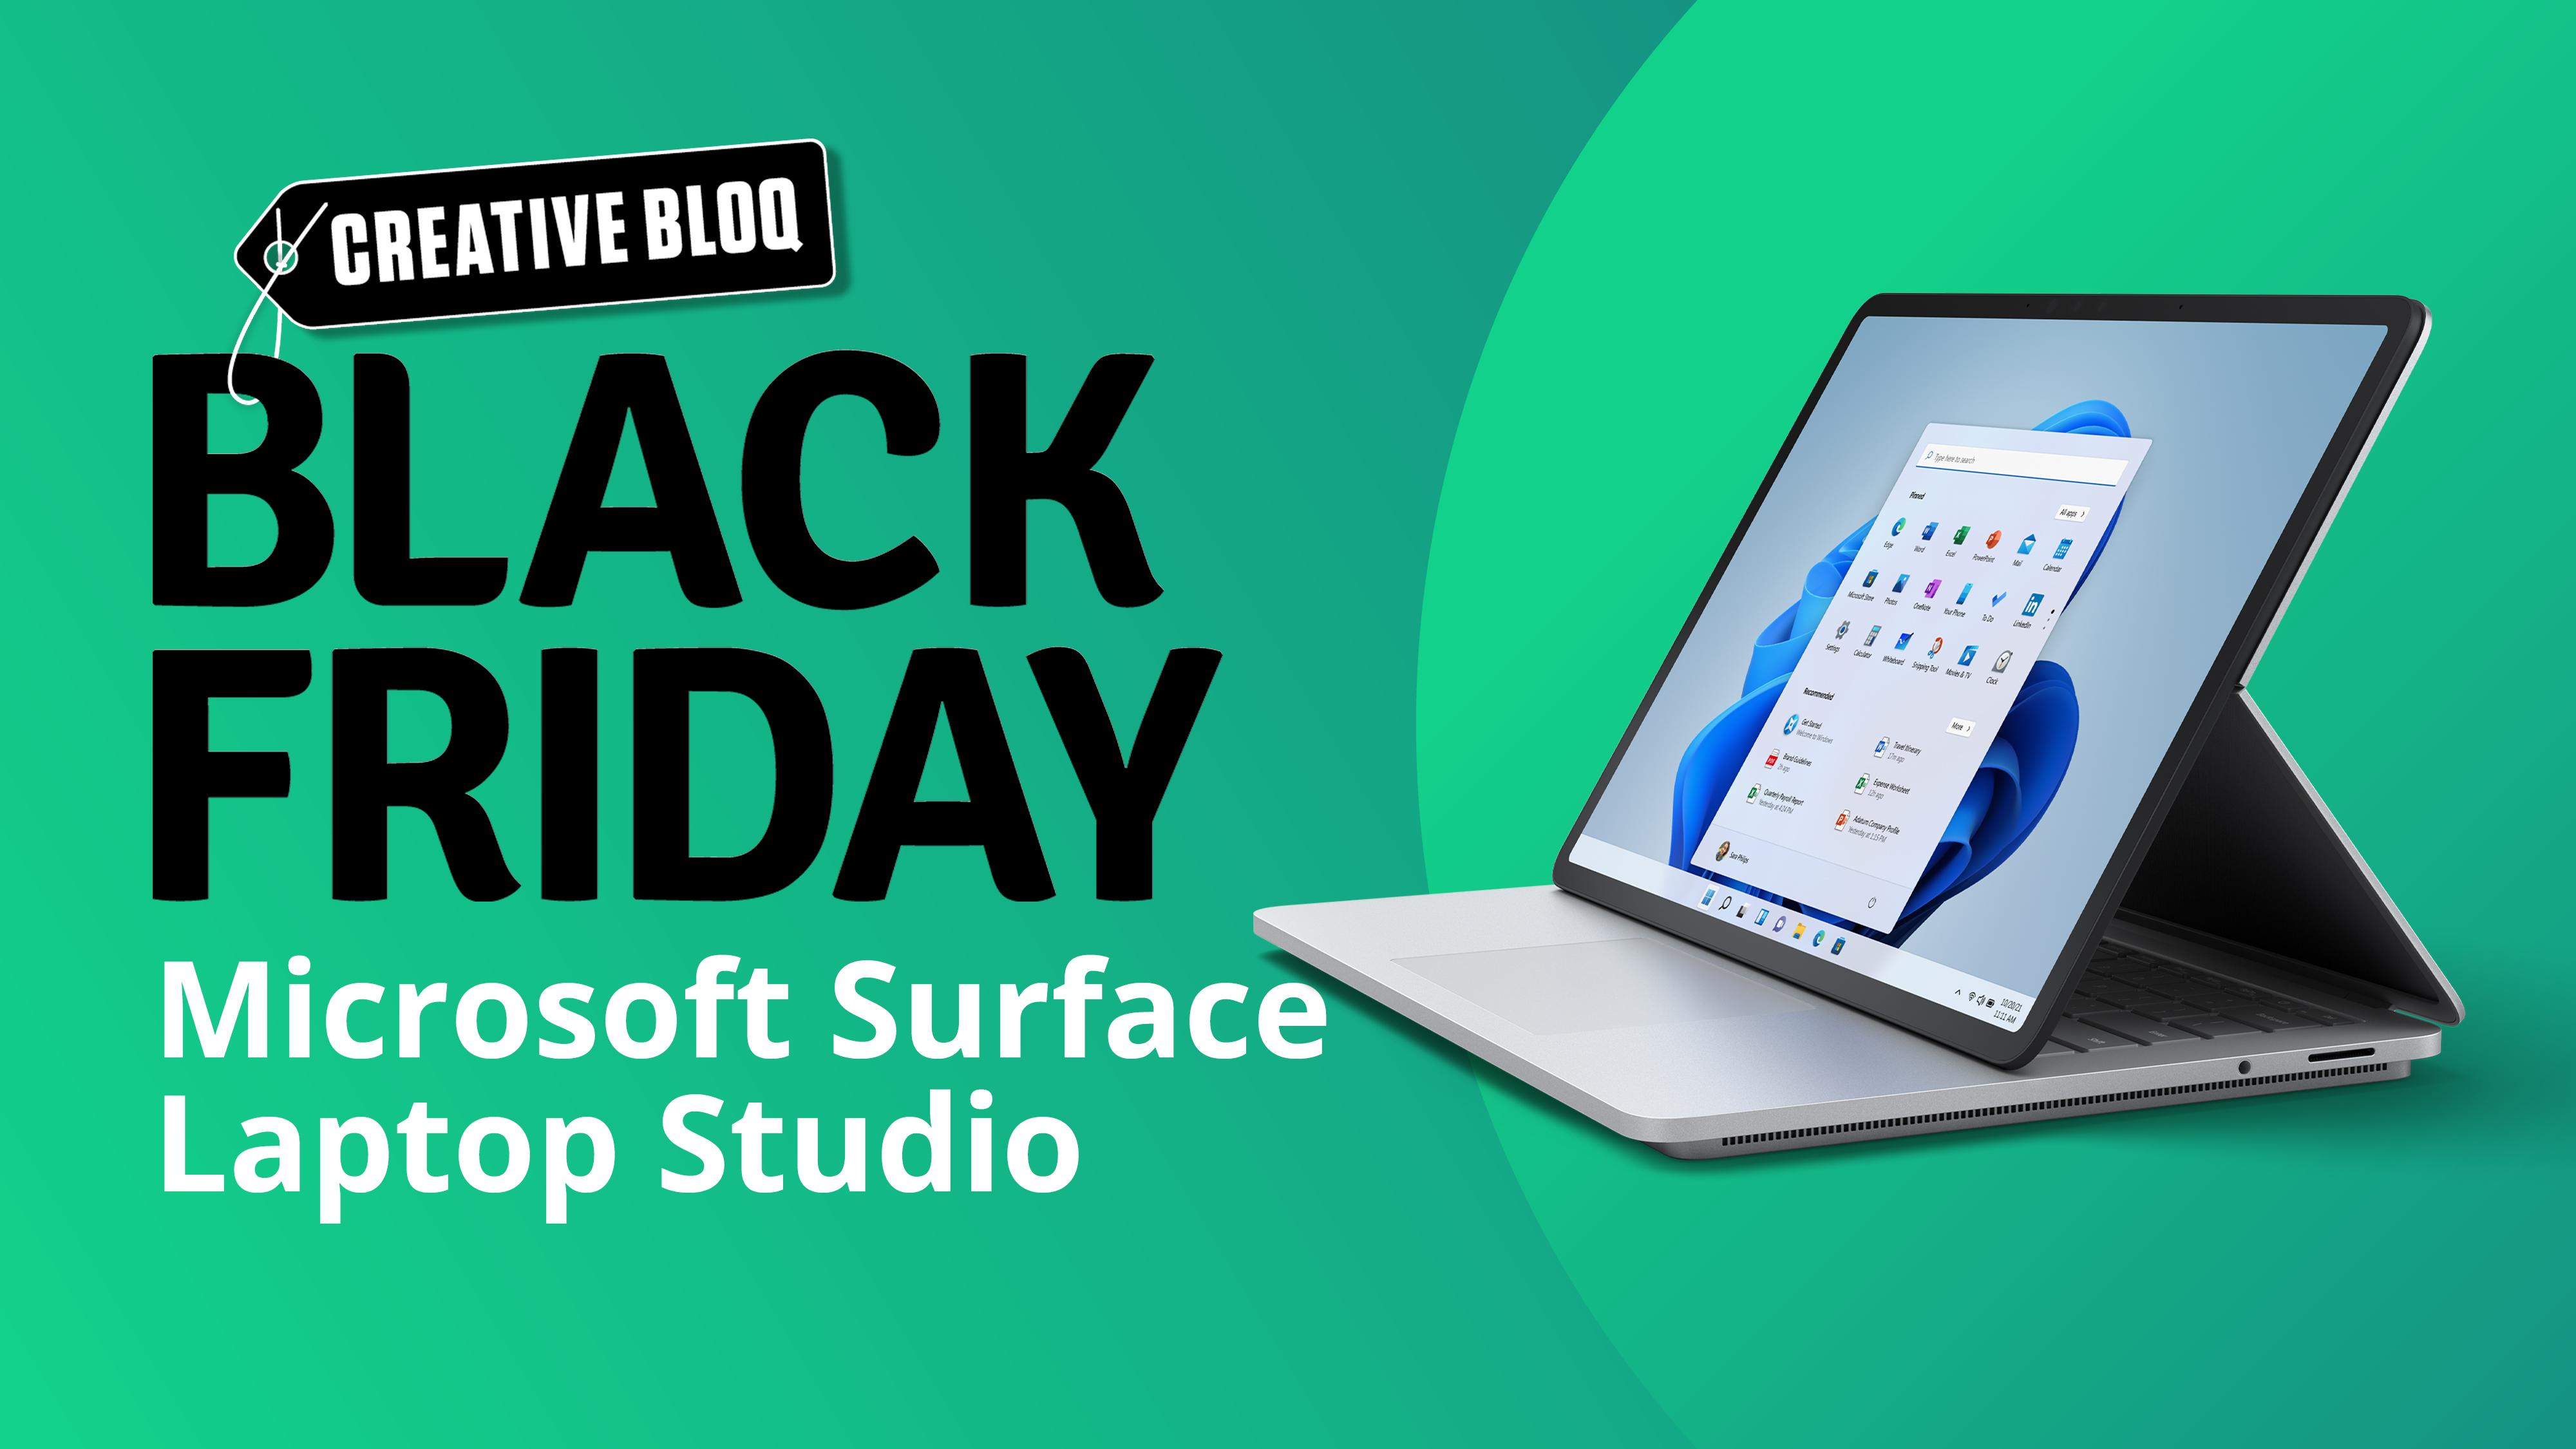 Microsoft Black Friday deal image, with Microsoft Surface Laptop Studio on a green background